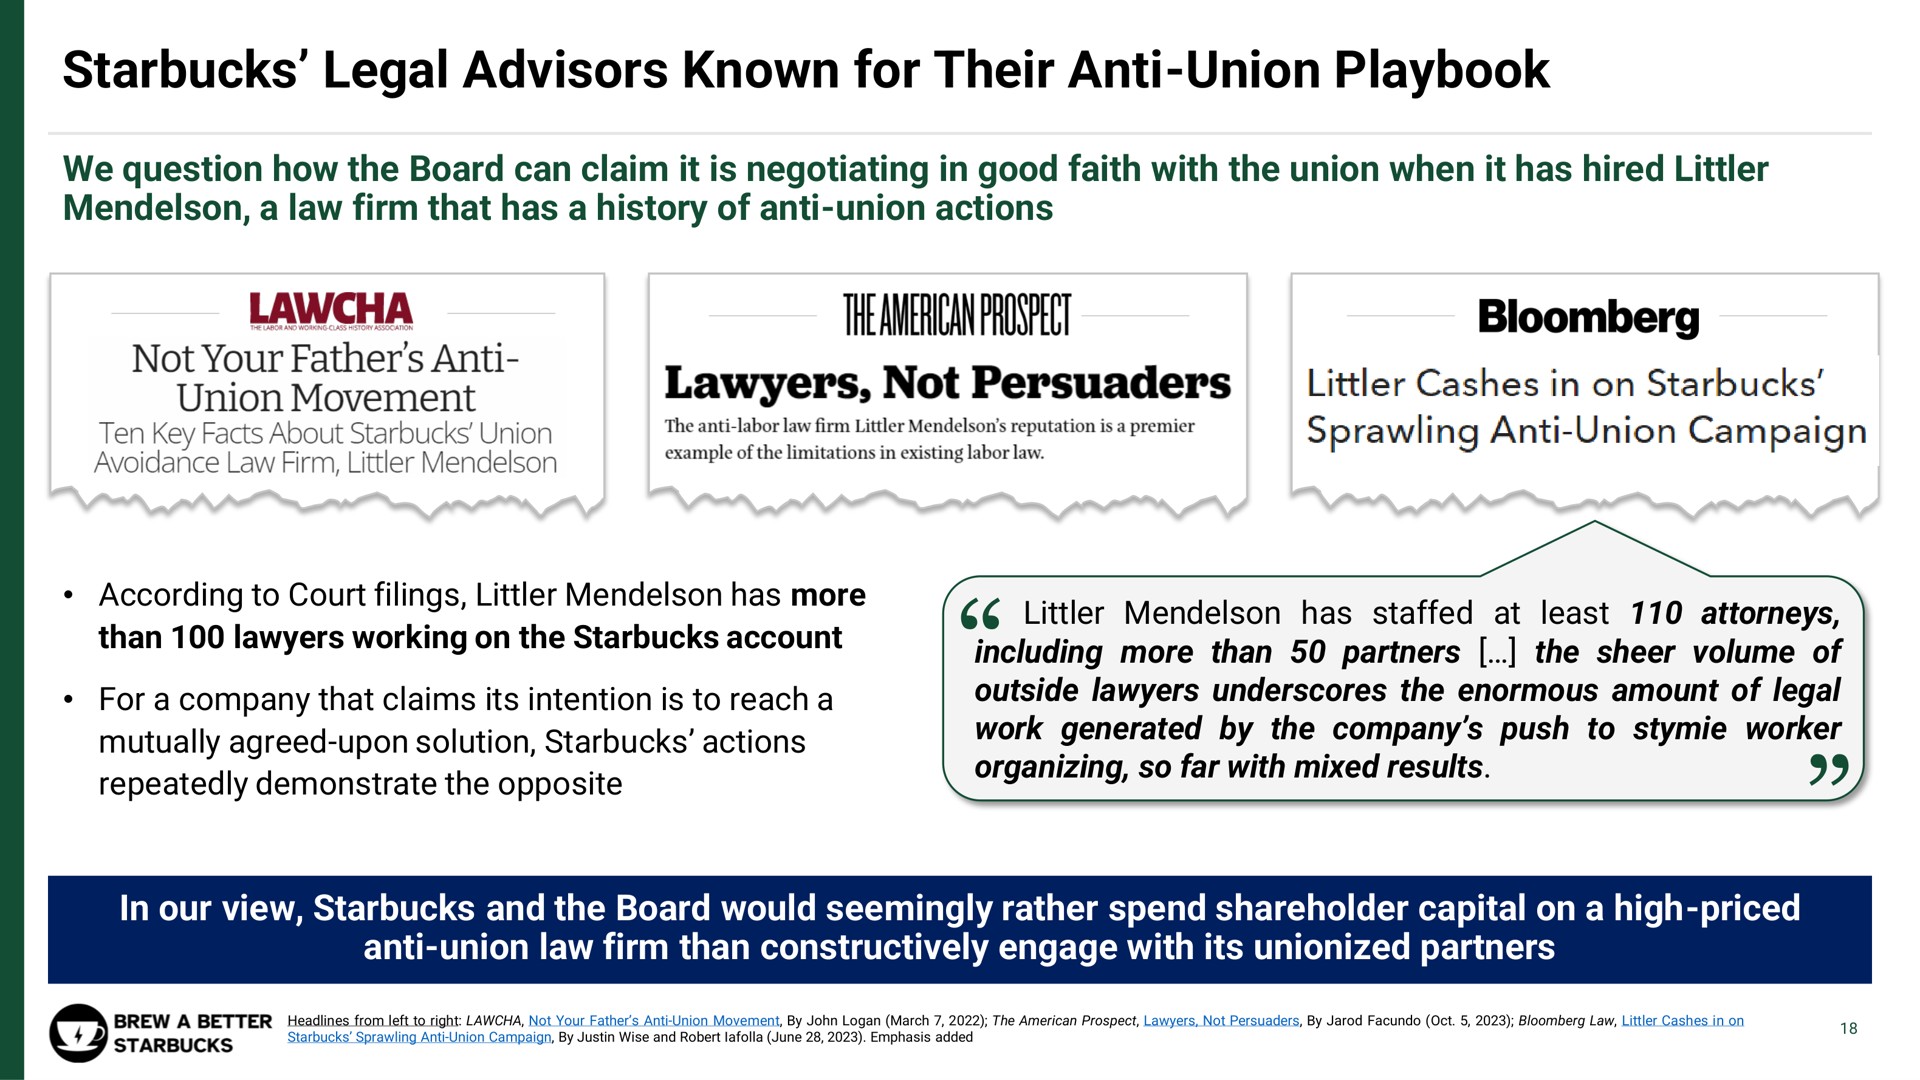 legal advisors known for their anti union playbook sant prospect lawyers not persuaders cashes in on | Strategic Organizing Center